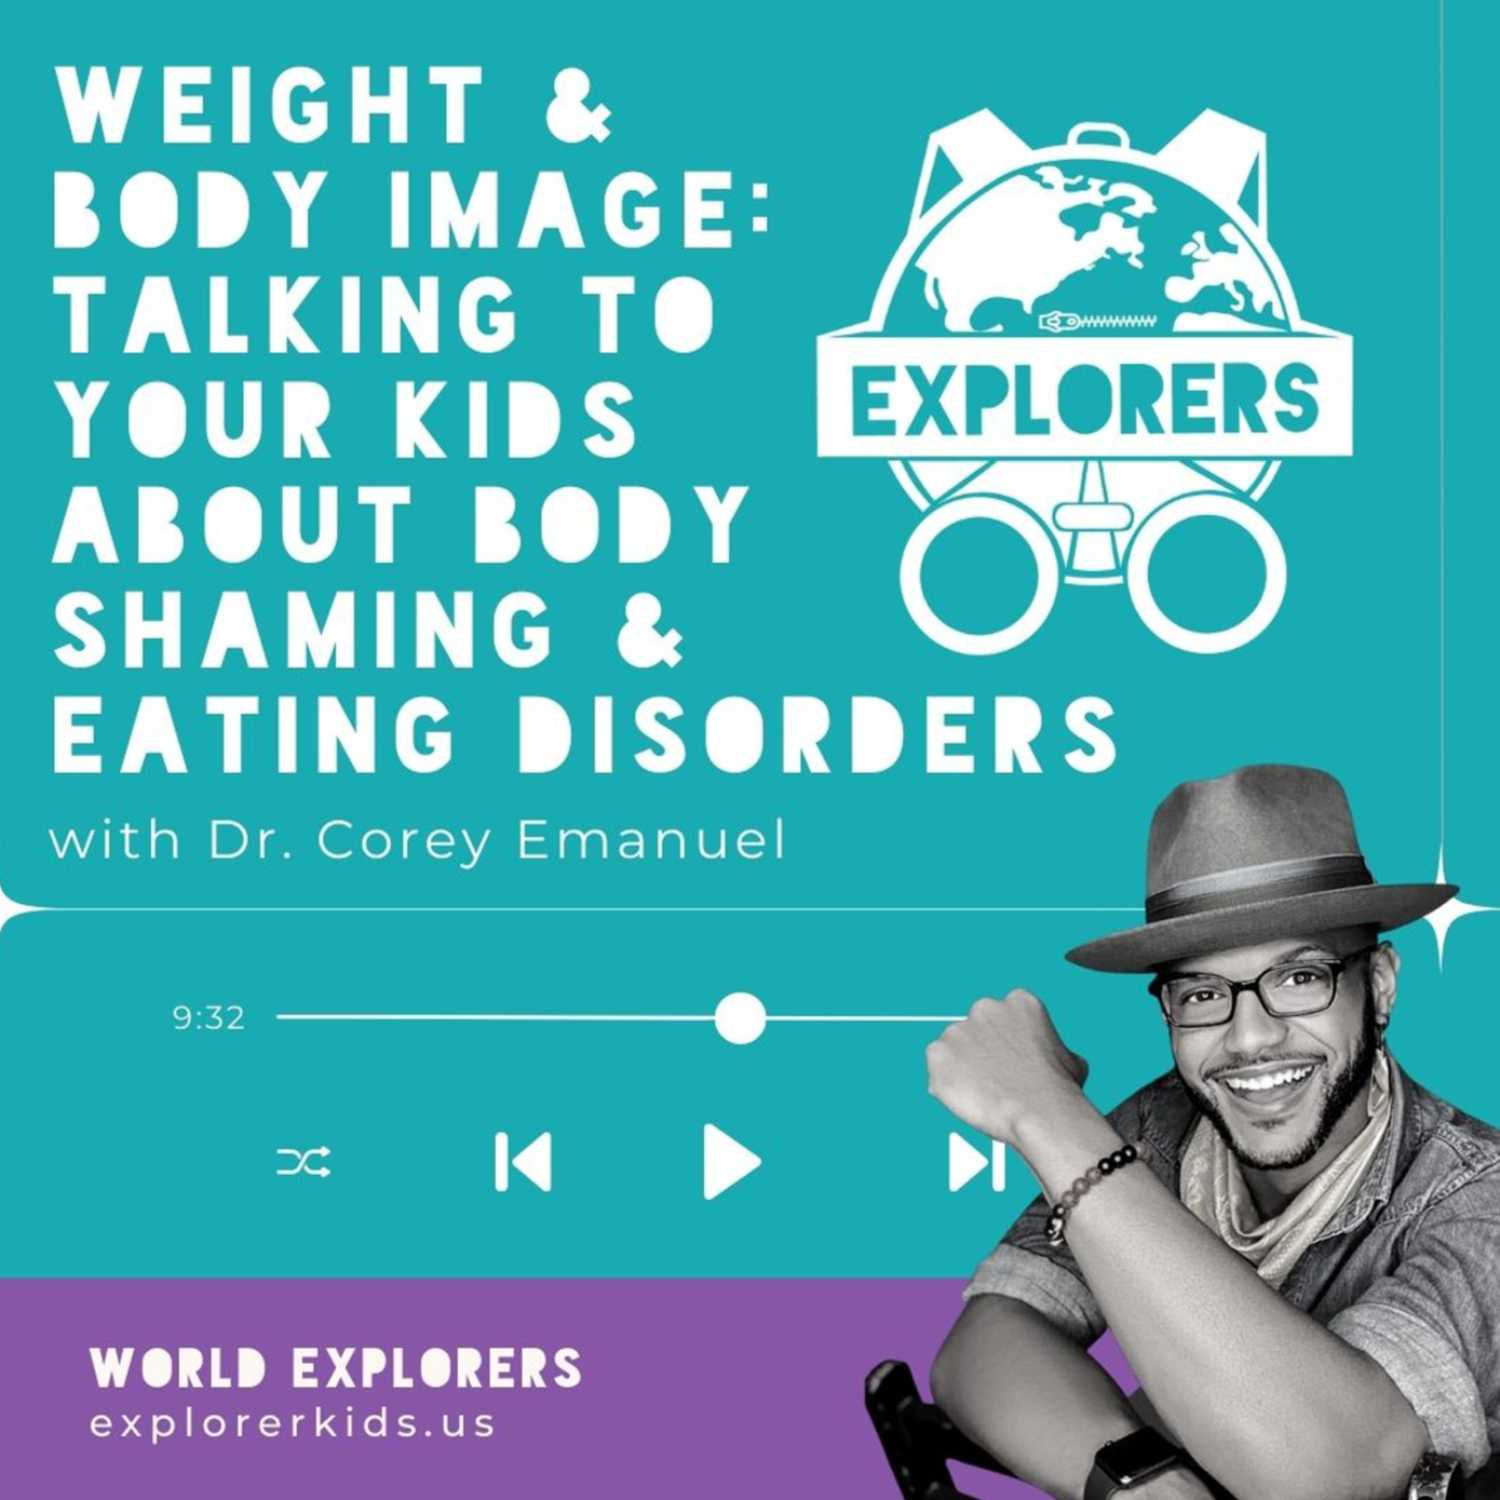 Weight & Body Image: Talking to Your Kids about Body Shaming & Eating Disorders